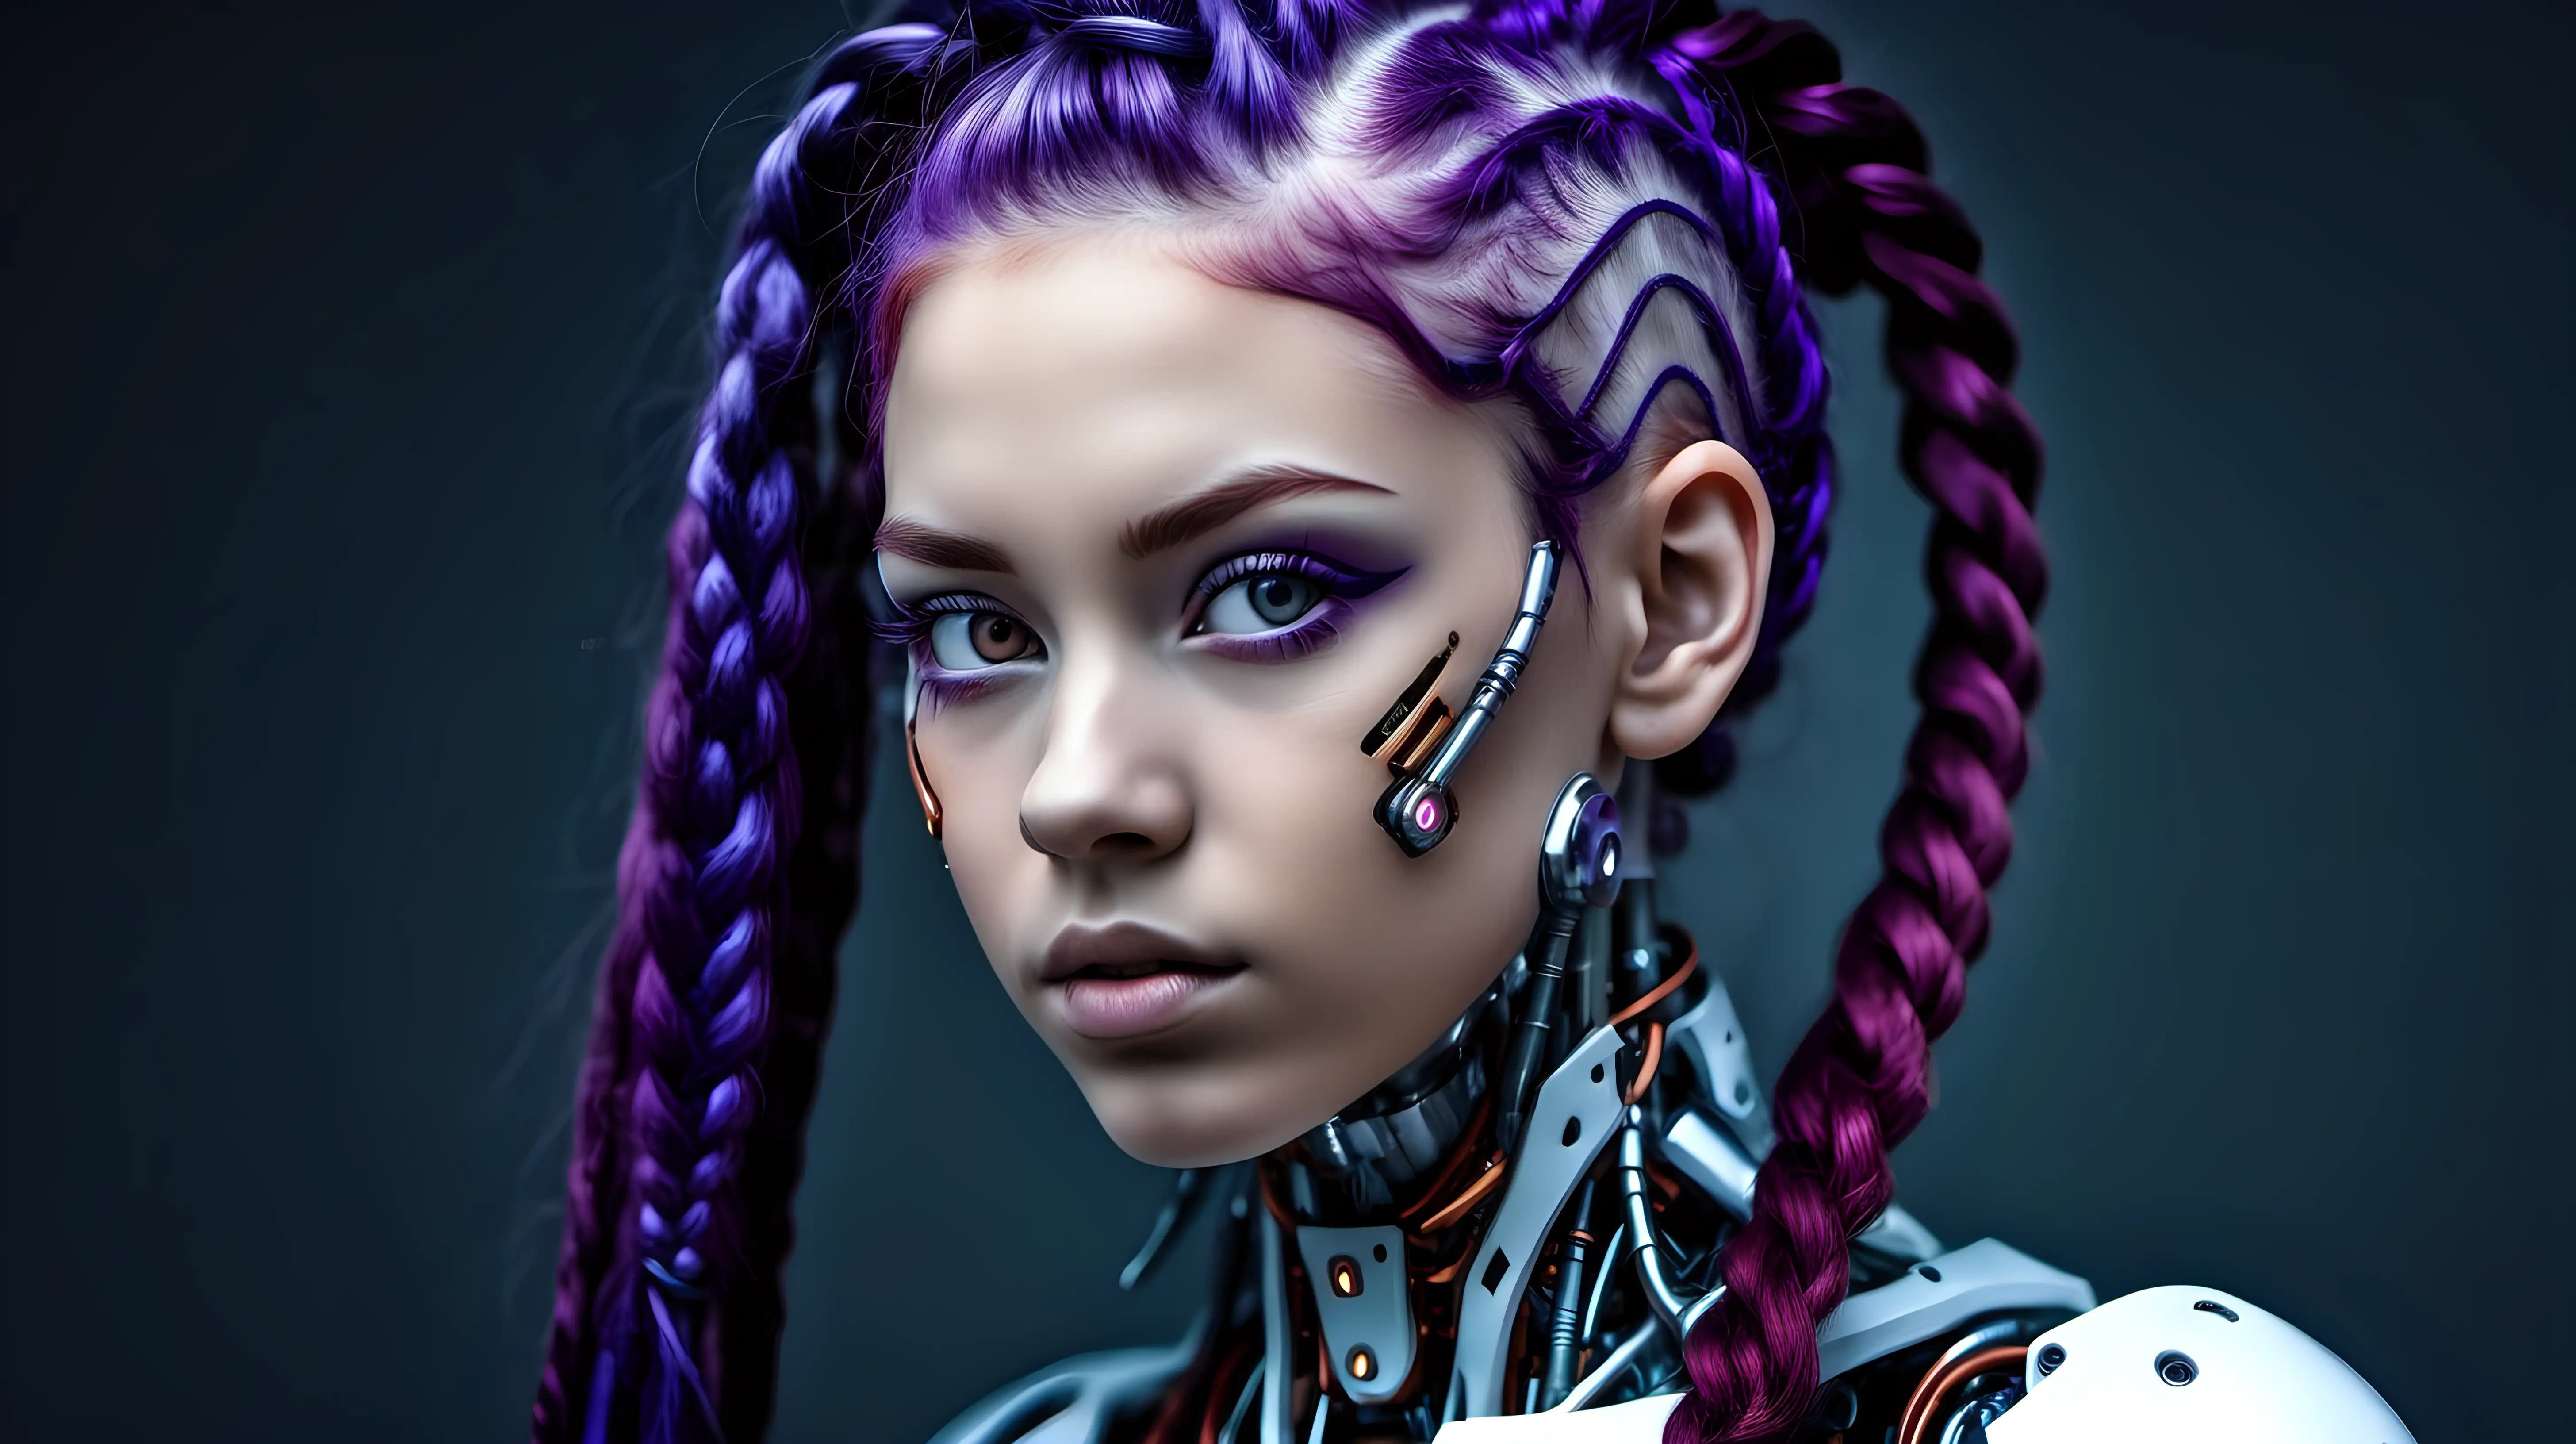 Stunning Cyborg Beauty with Vibrant Purple and Red Braids